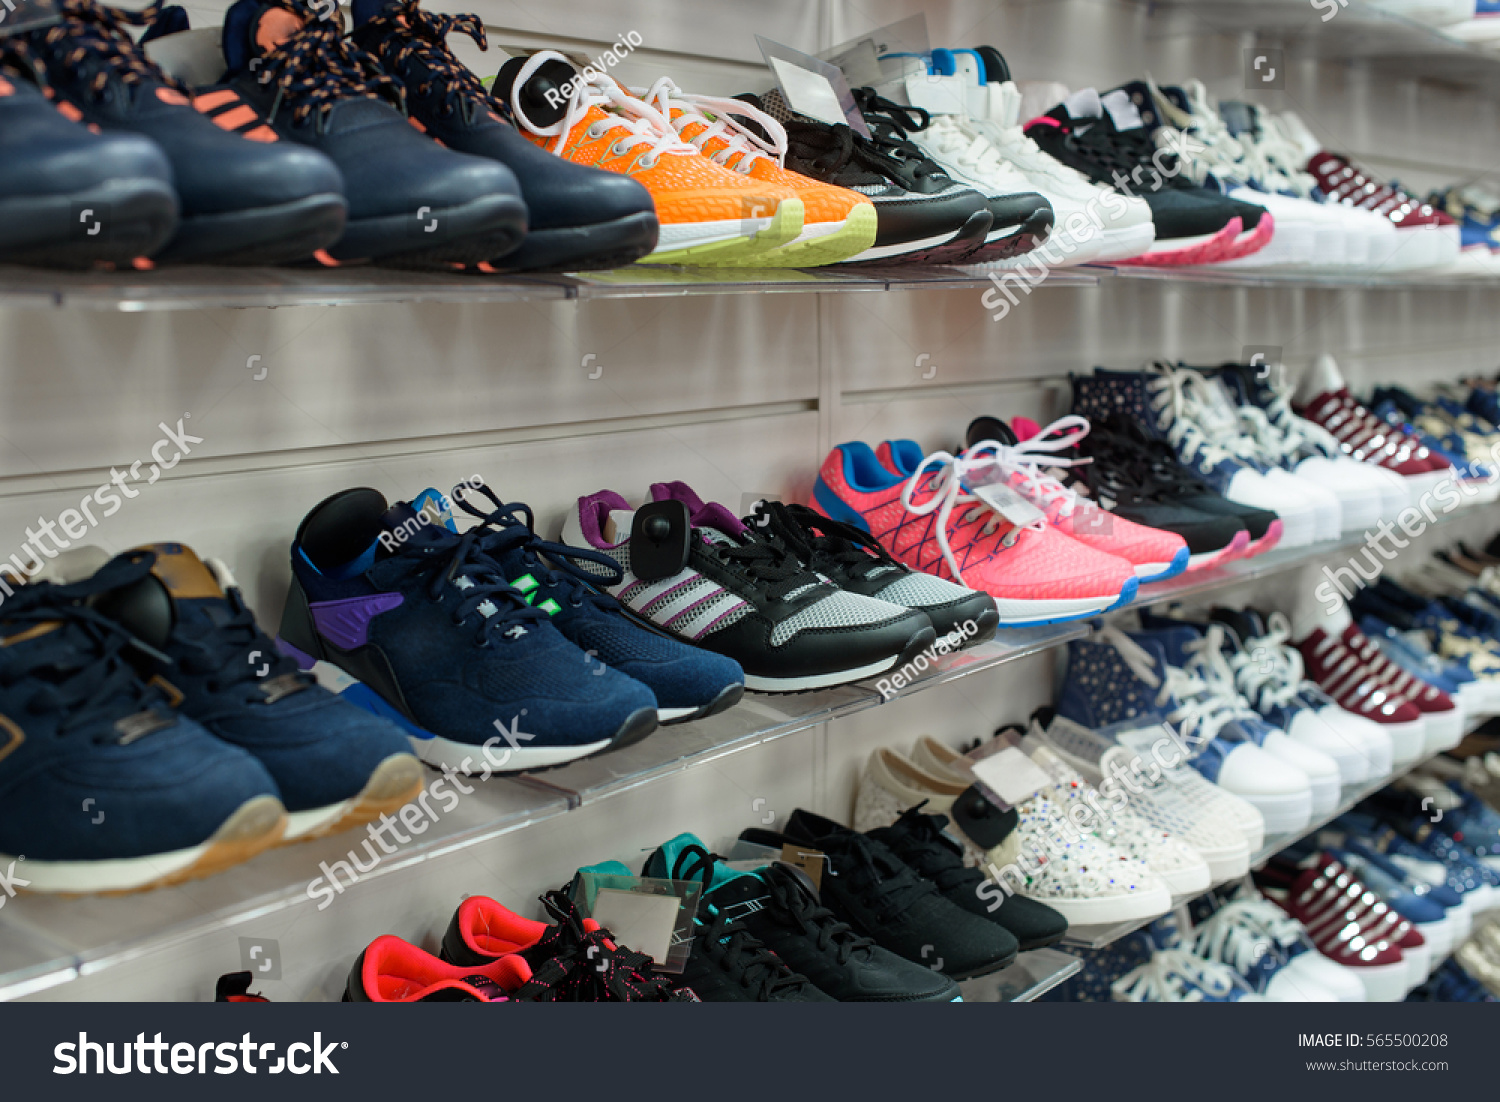 140,912 Shoe store Stock Photos, Images & Photography | Shutterstock